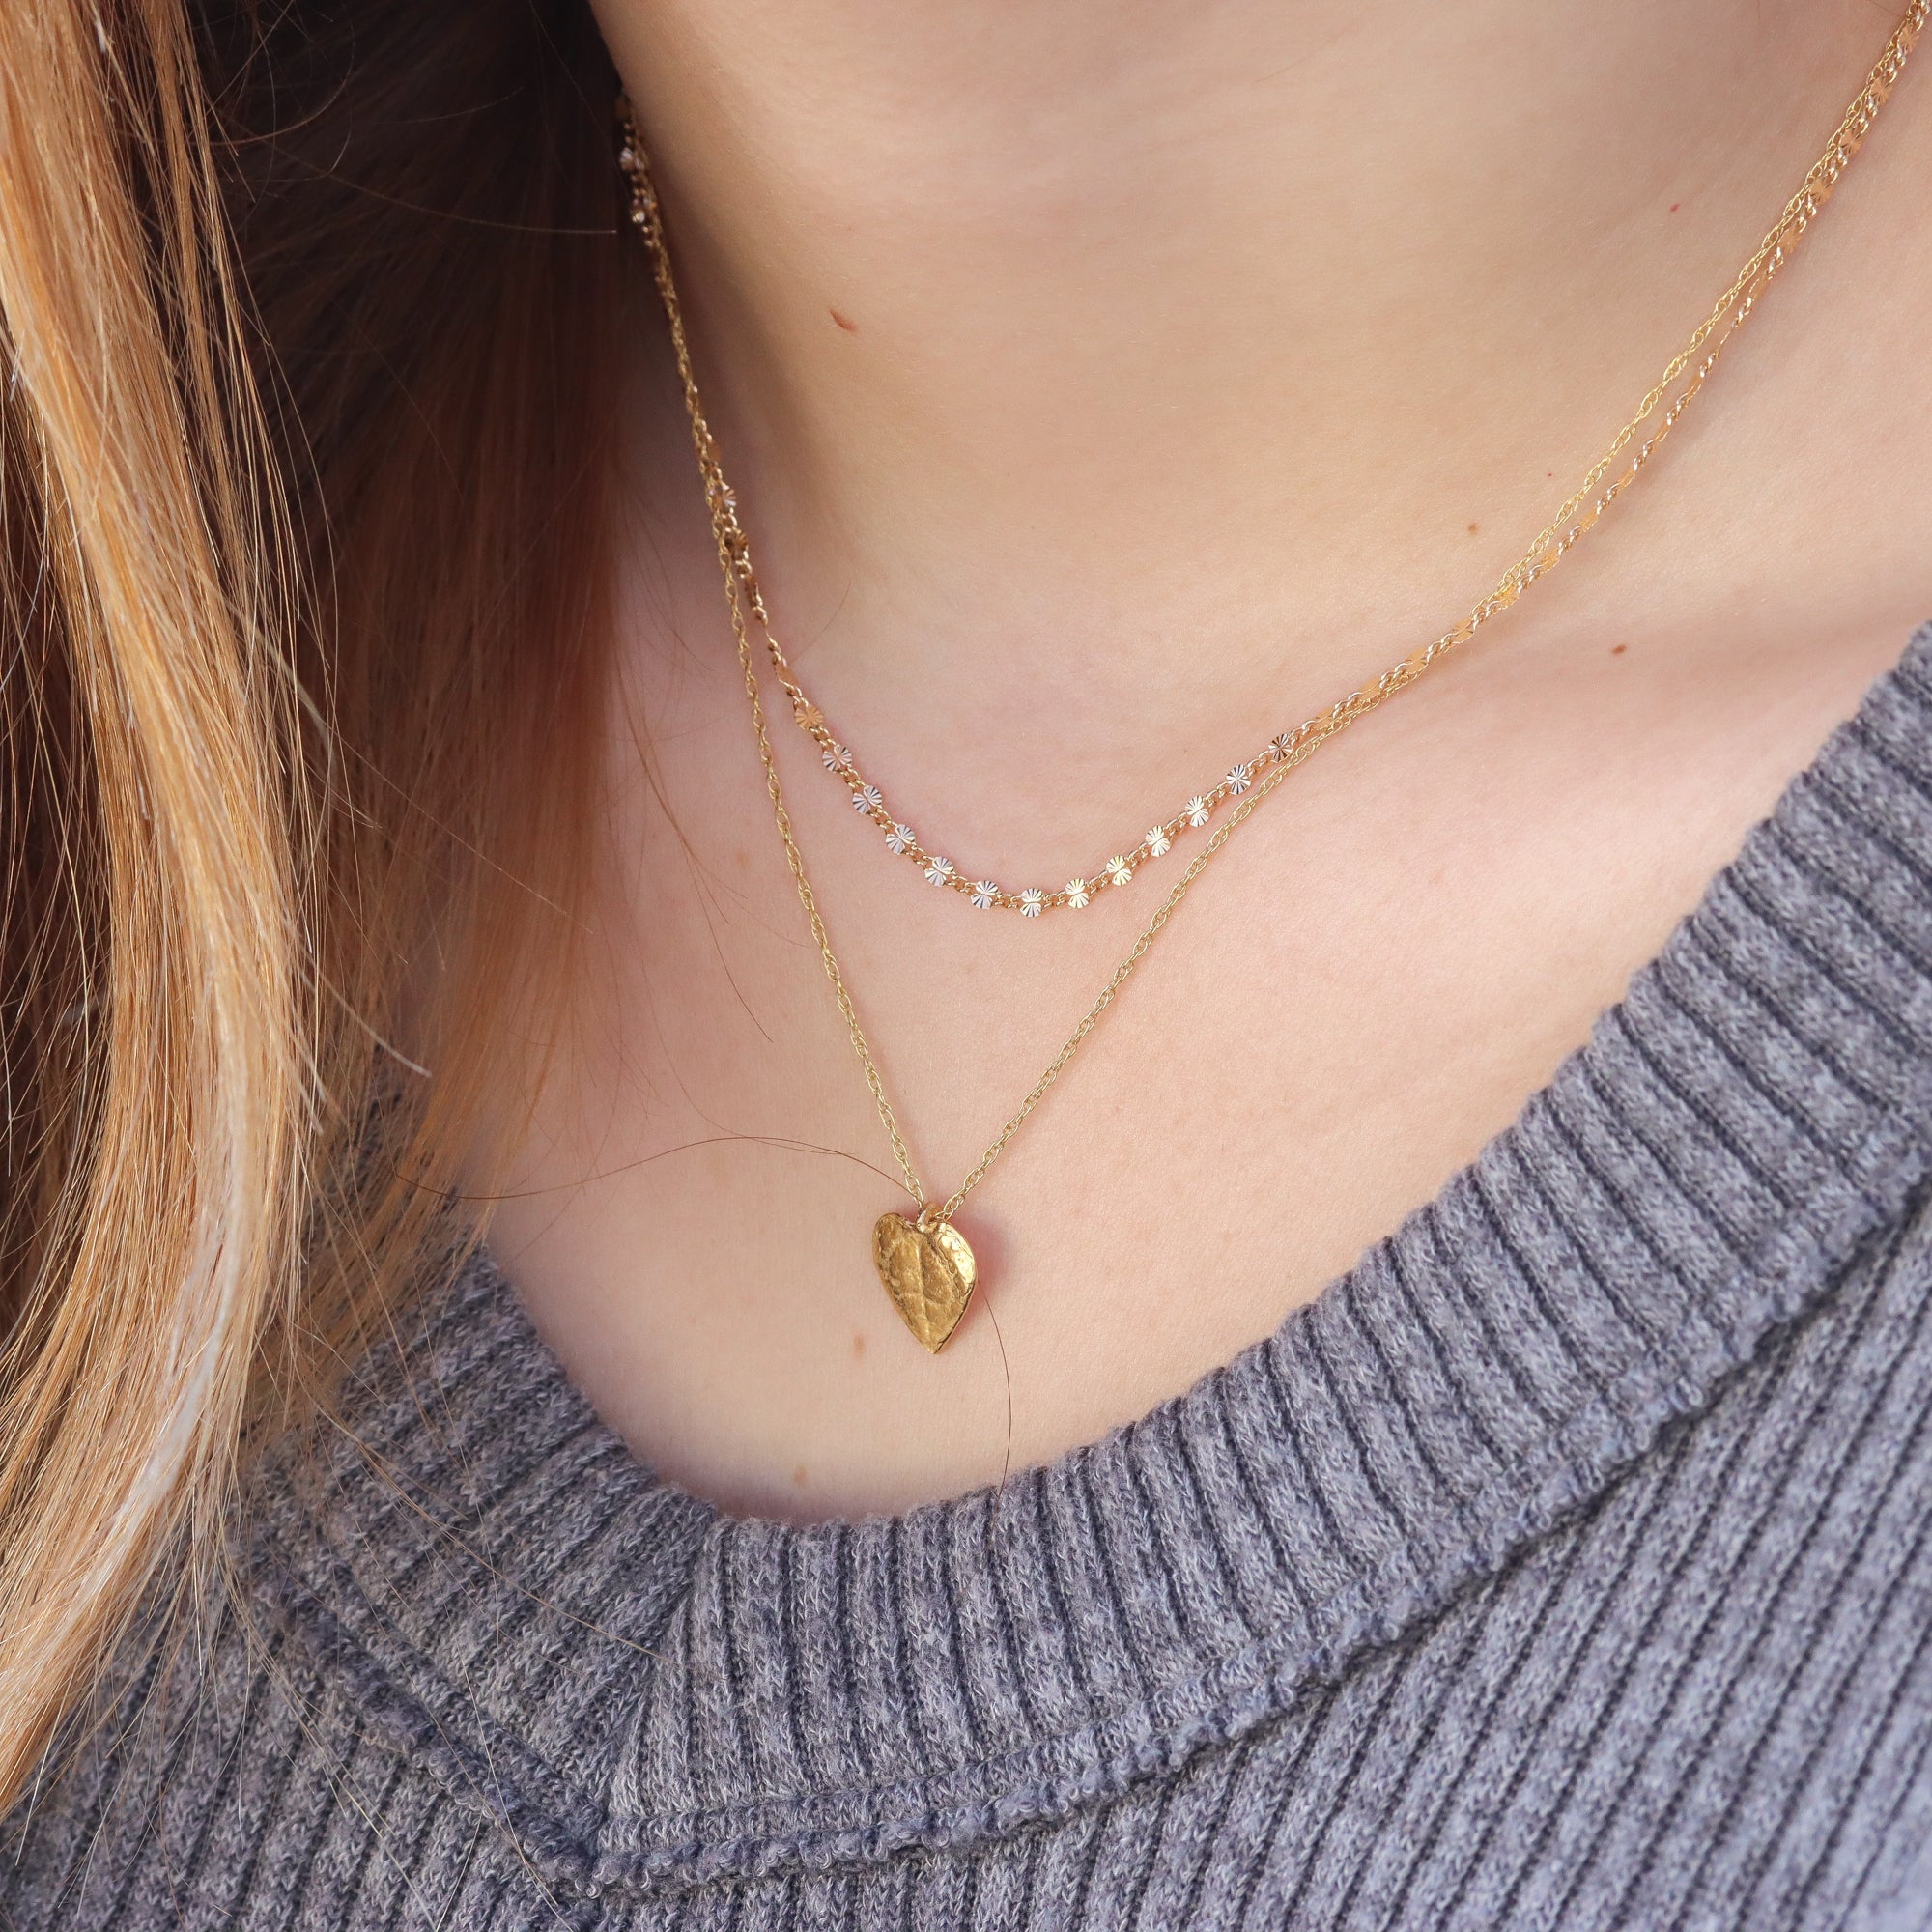 String of Hearts Necklace in Gold and Sterling Silver